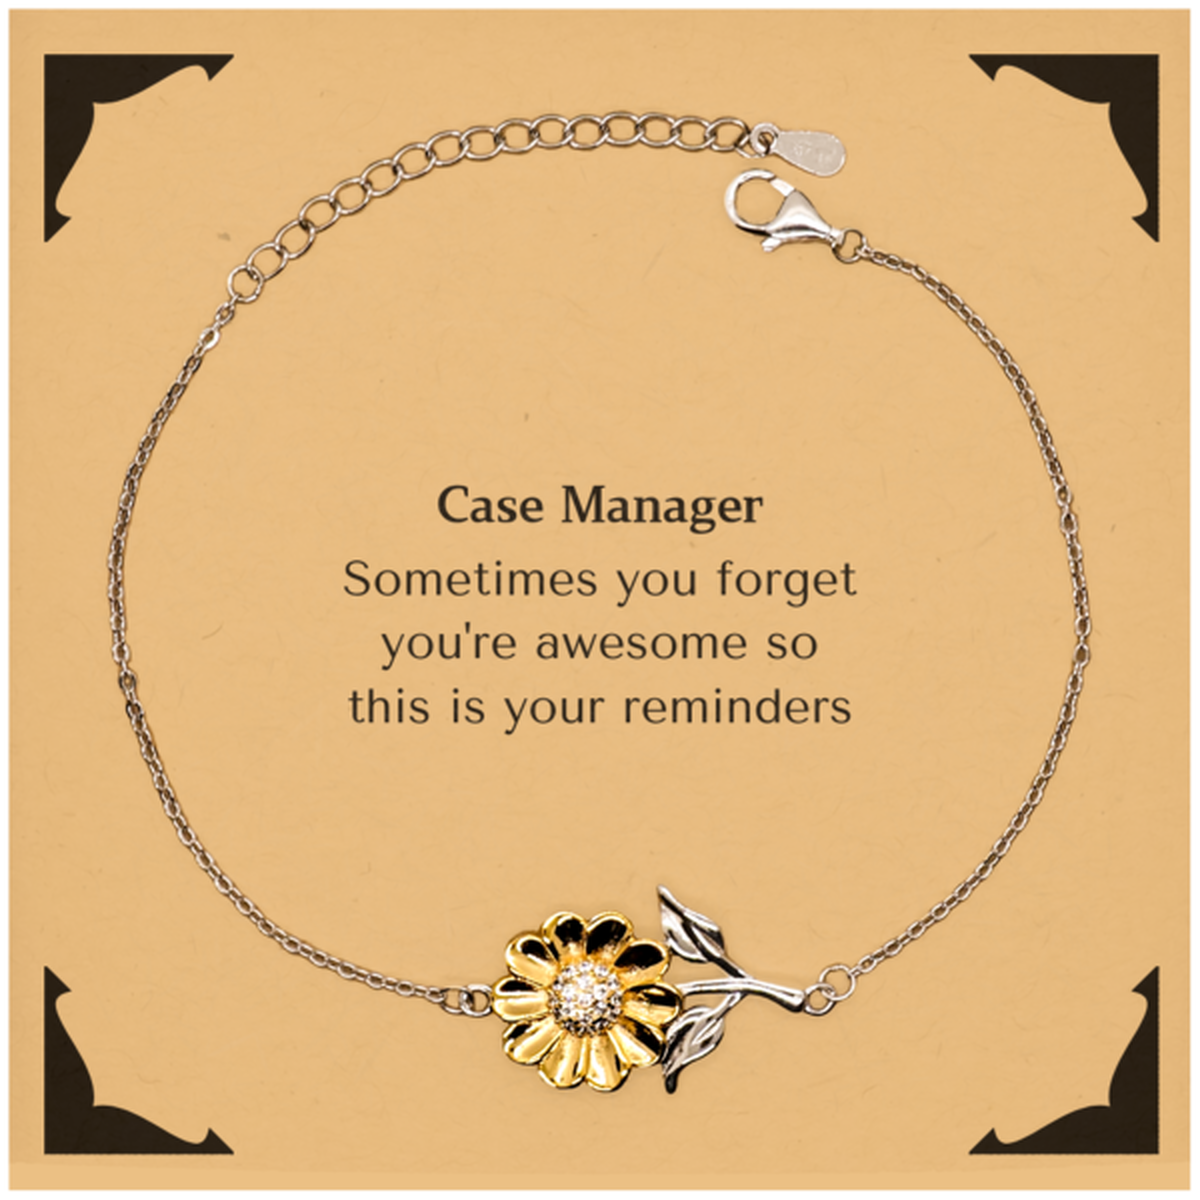 Sentimental Case Manager Sunflower Bracelet, Case Manager Sometimes you forget you're awesome so this is your reminders, Graduation Christmas Birthday Gifts for Case Manager, Men, Women, Coworkers